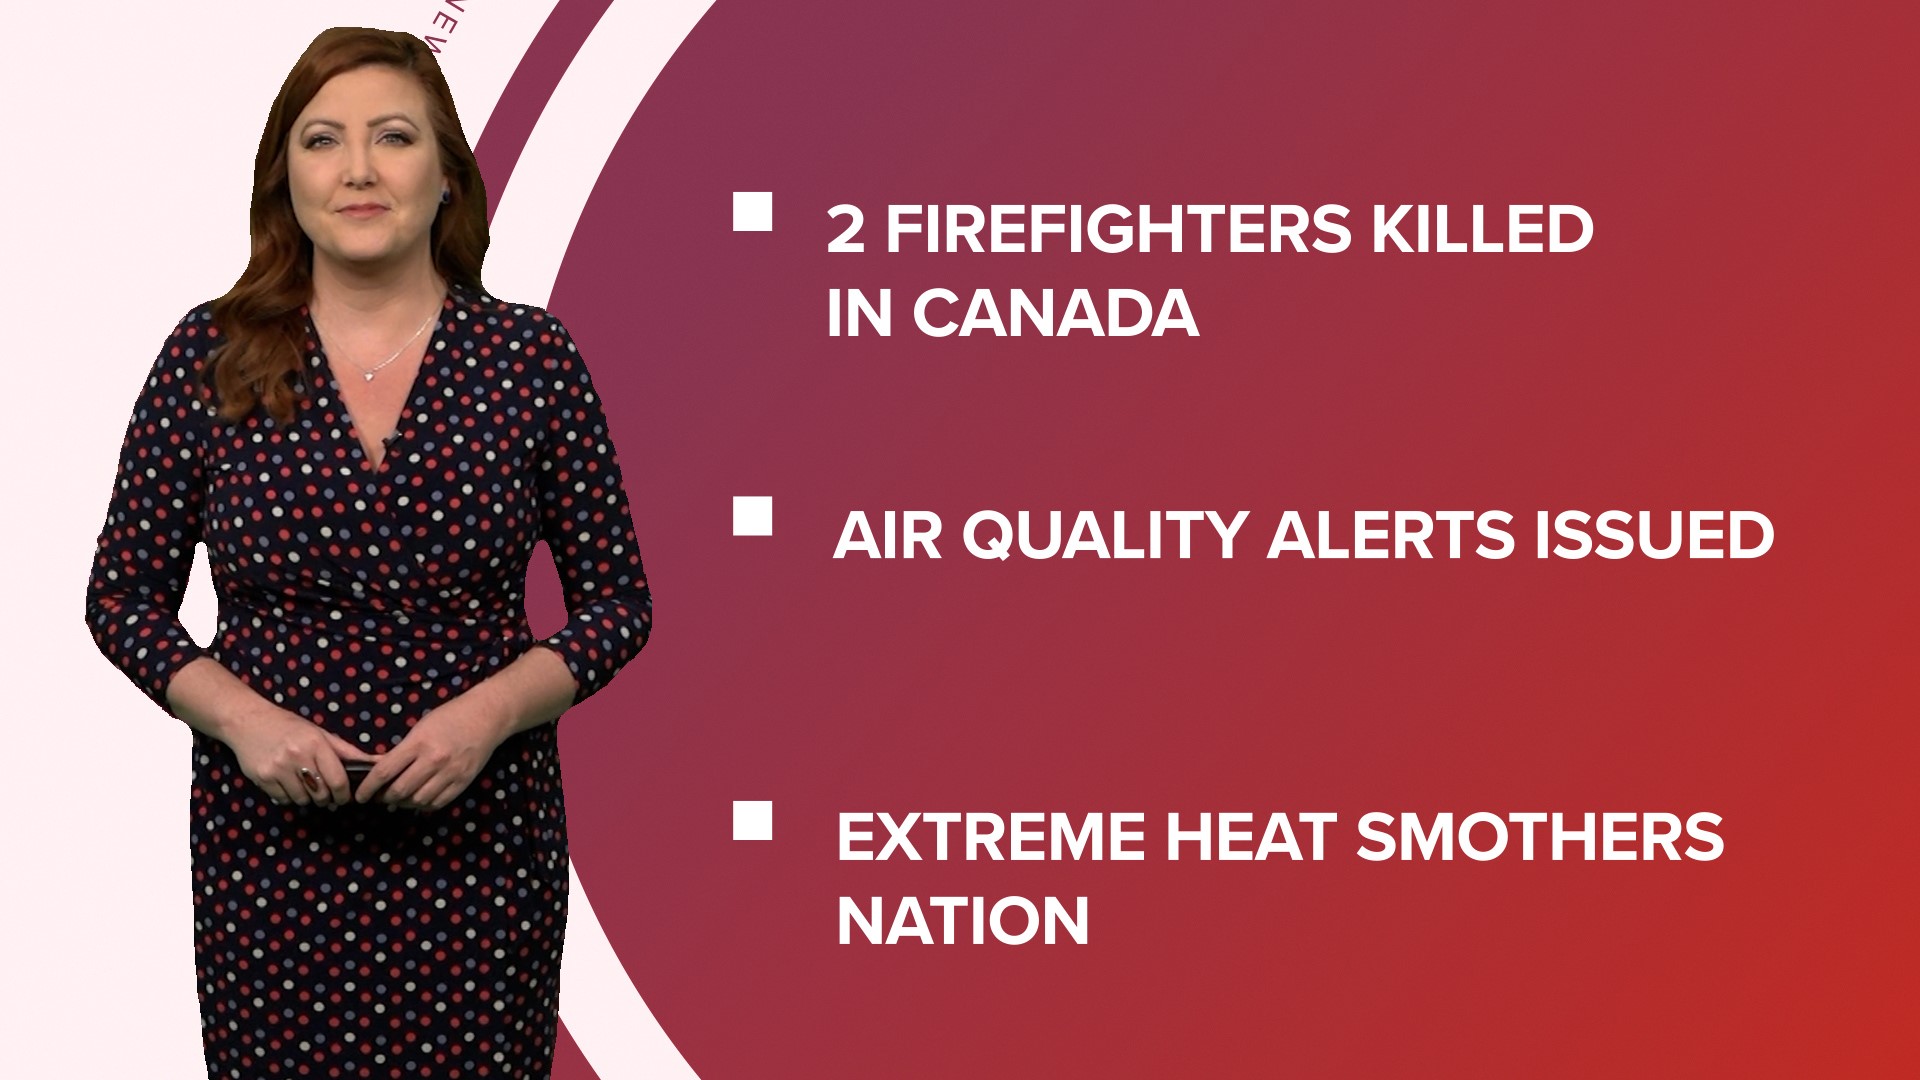 A look at what is happening in the news from extreme heat to poor air quality alerts issued and a shootout with police ends with a suspected gunman dead.